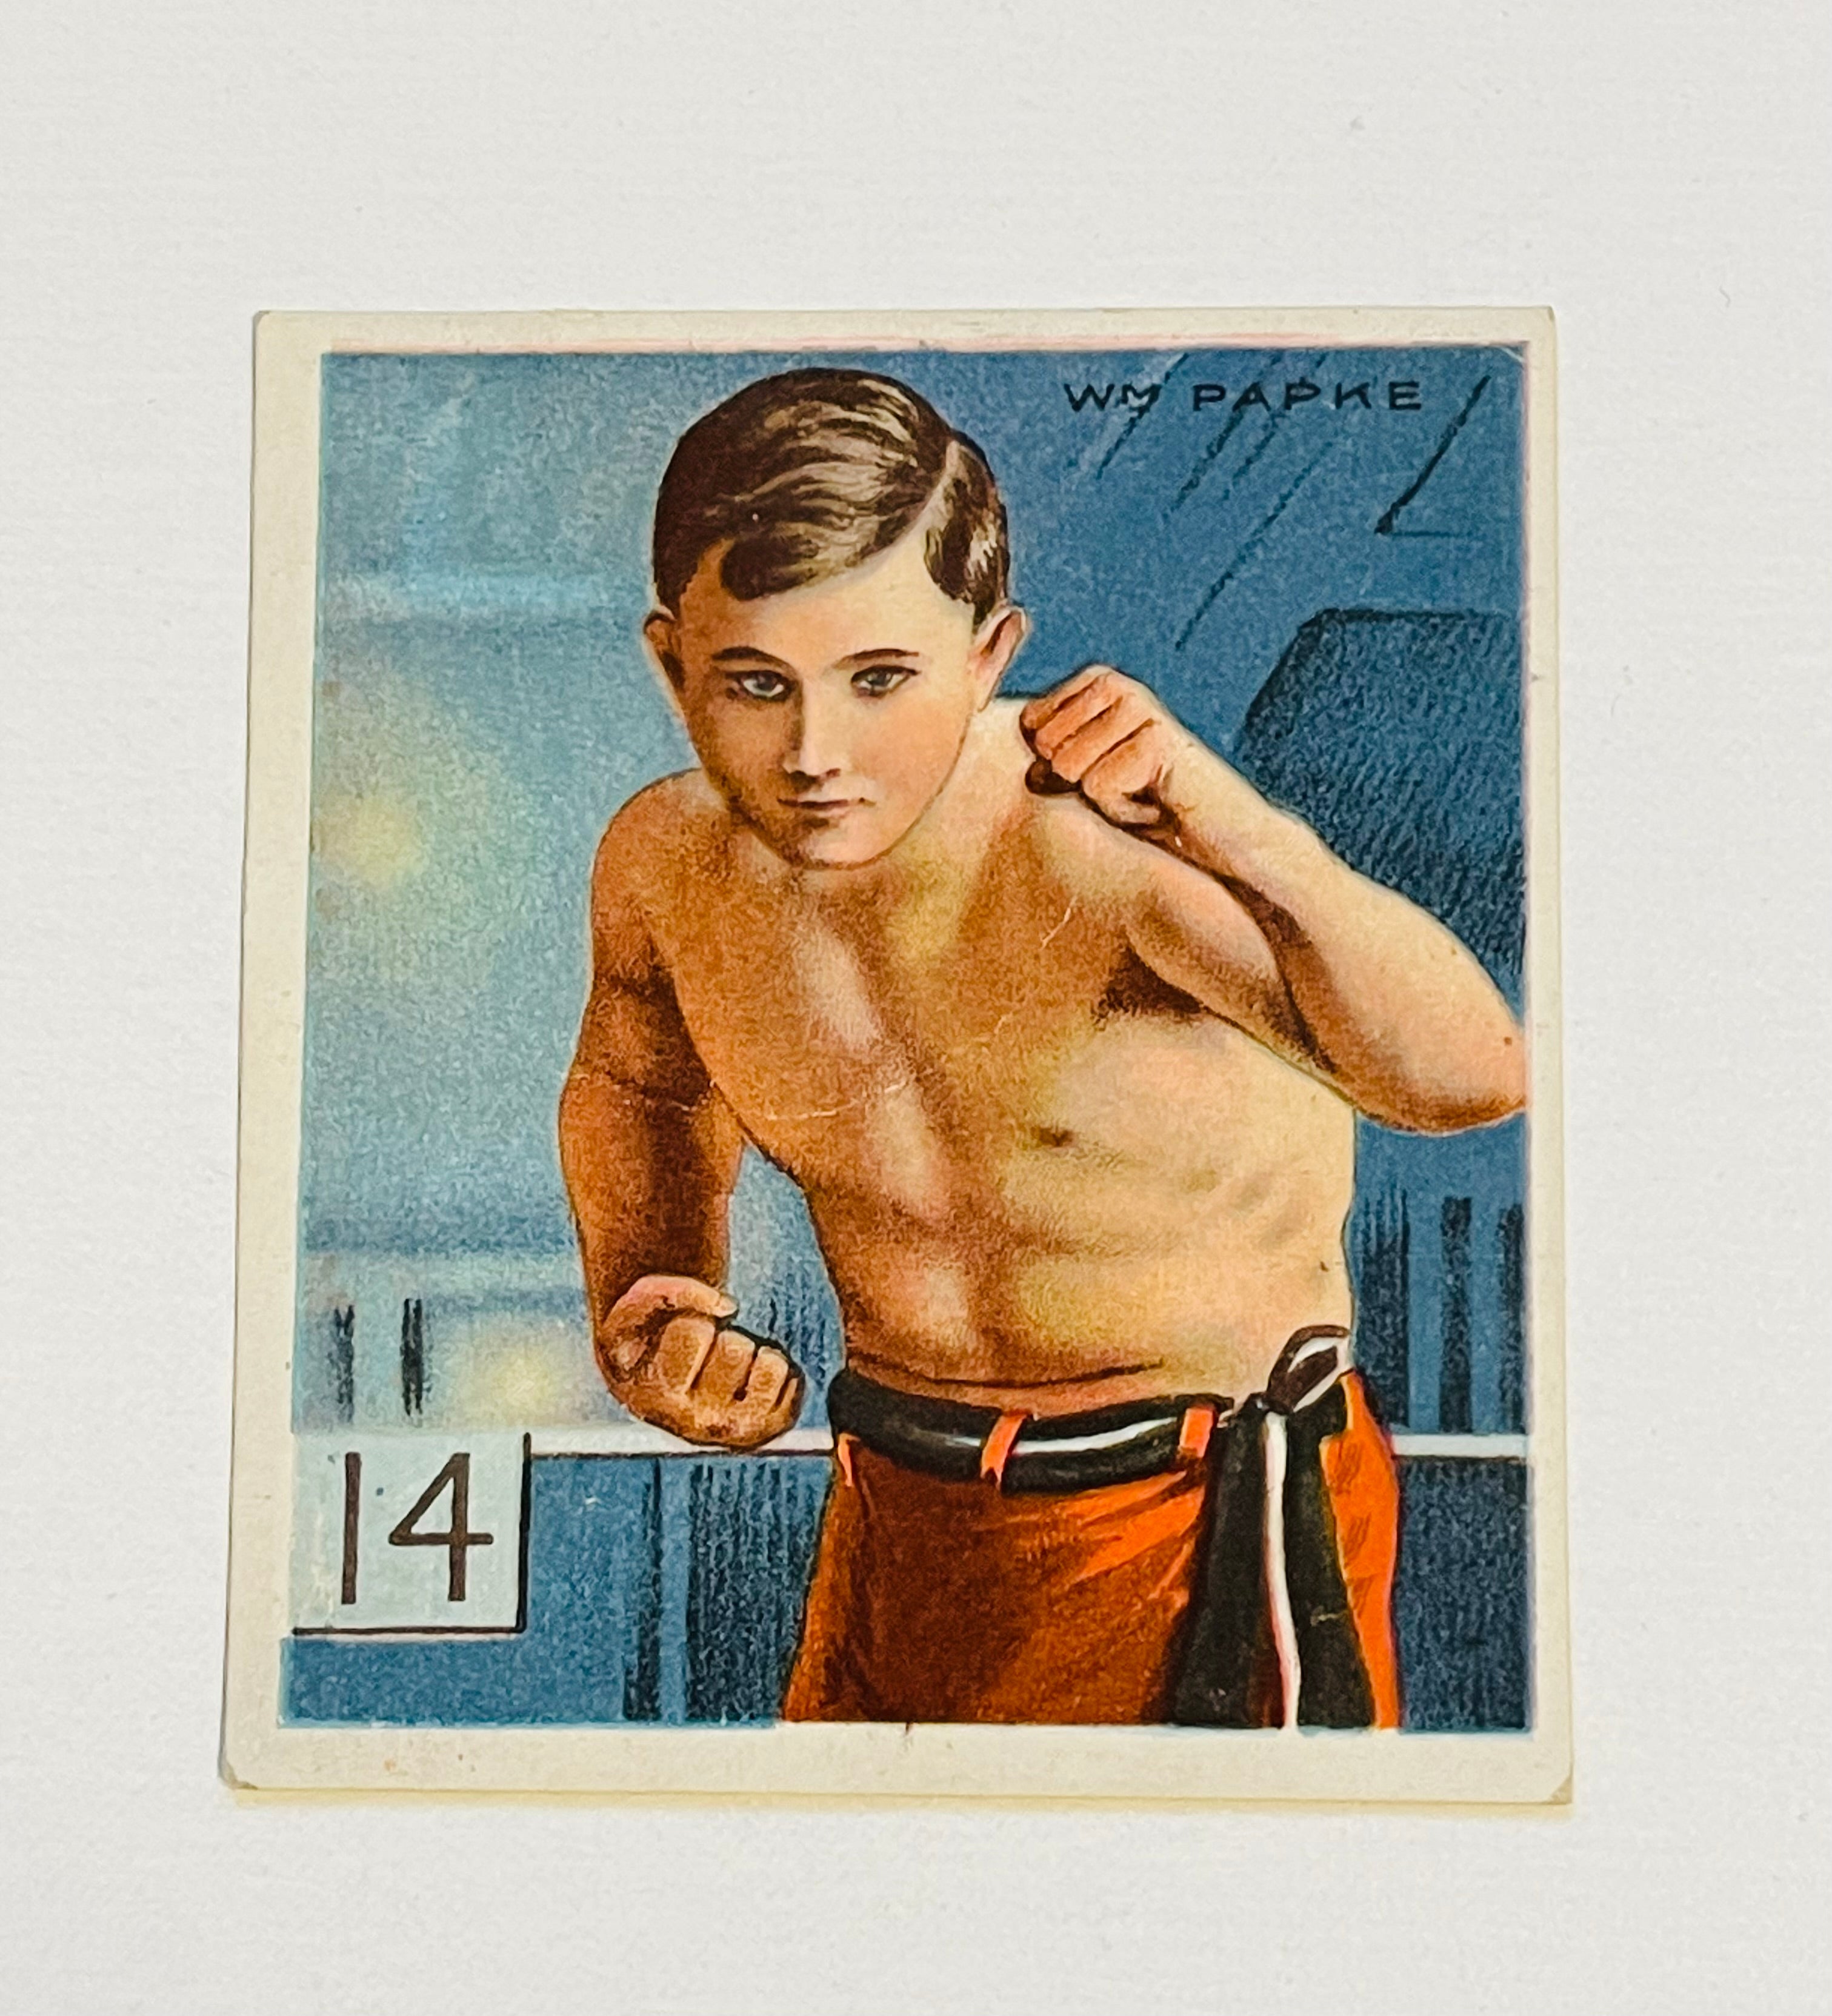 Boxing Billy Papke rare vintage cigarette boxing card 1910